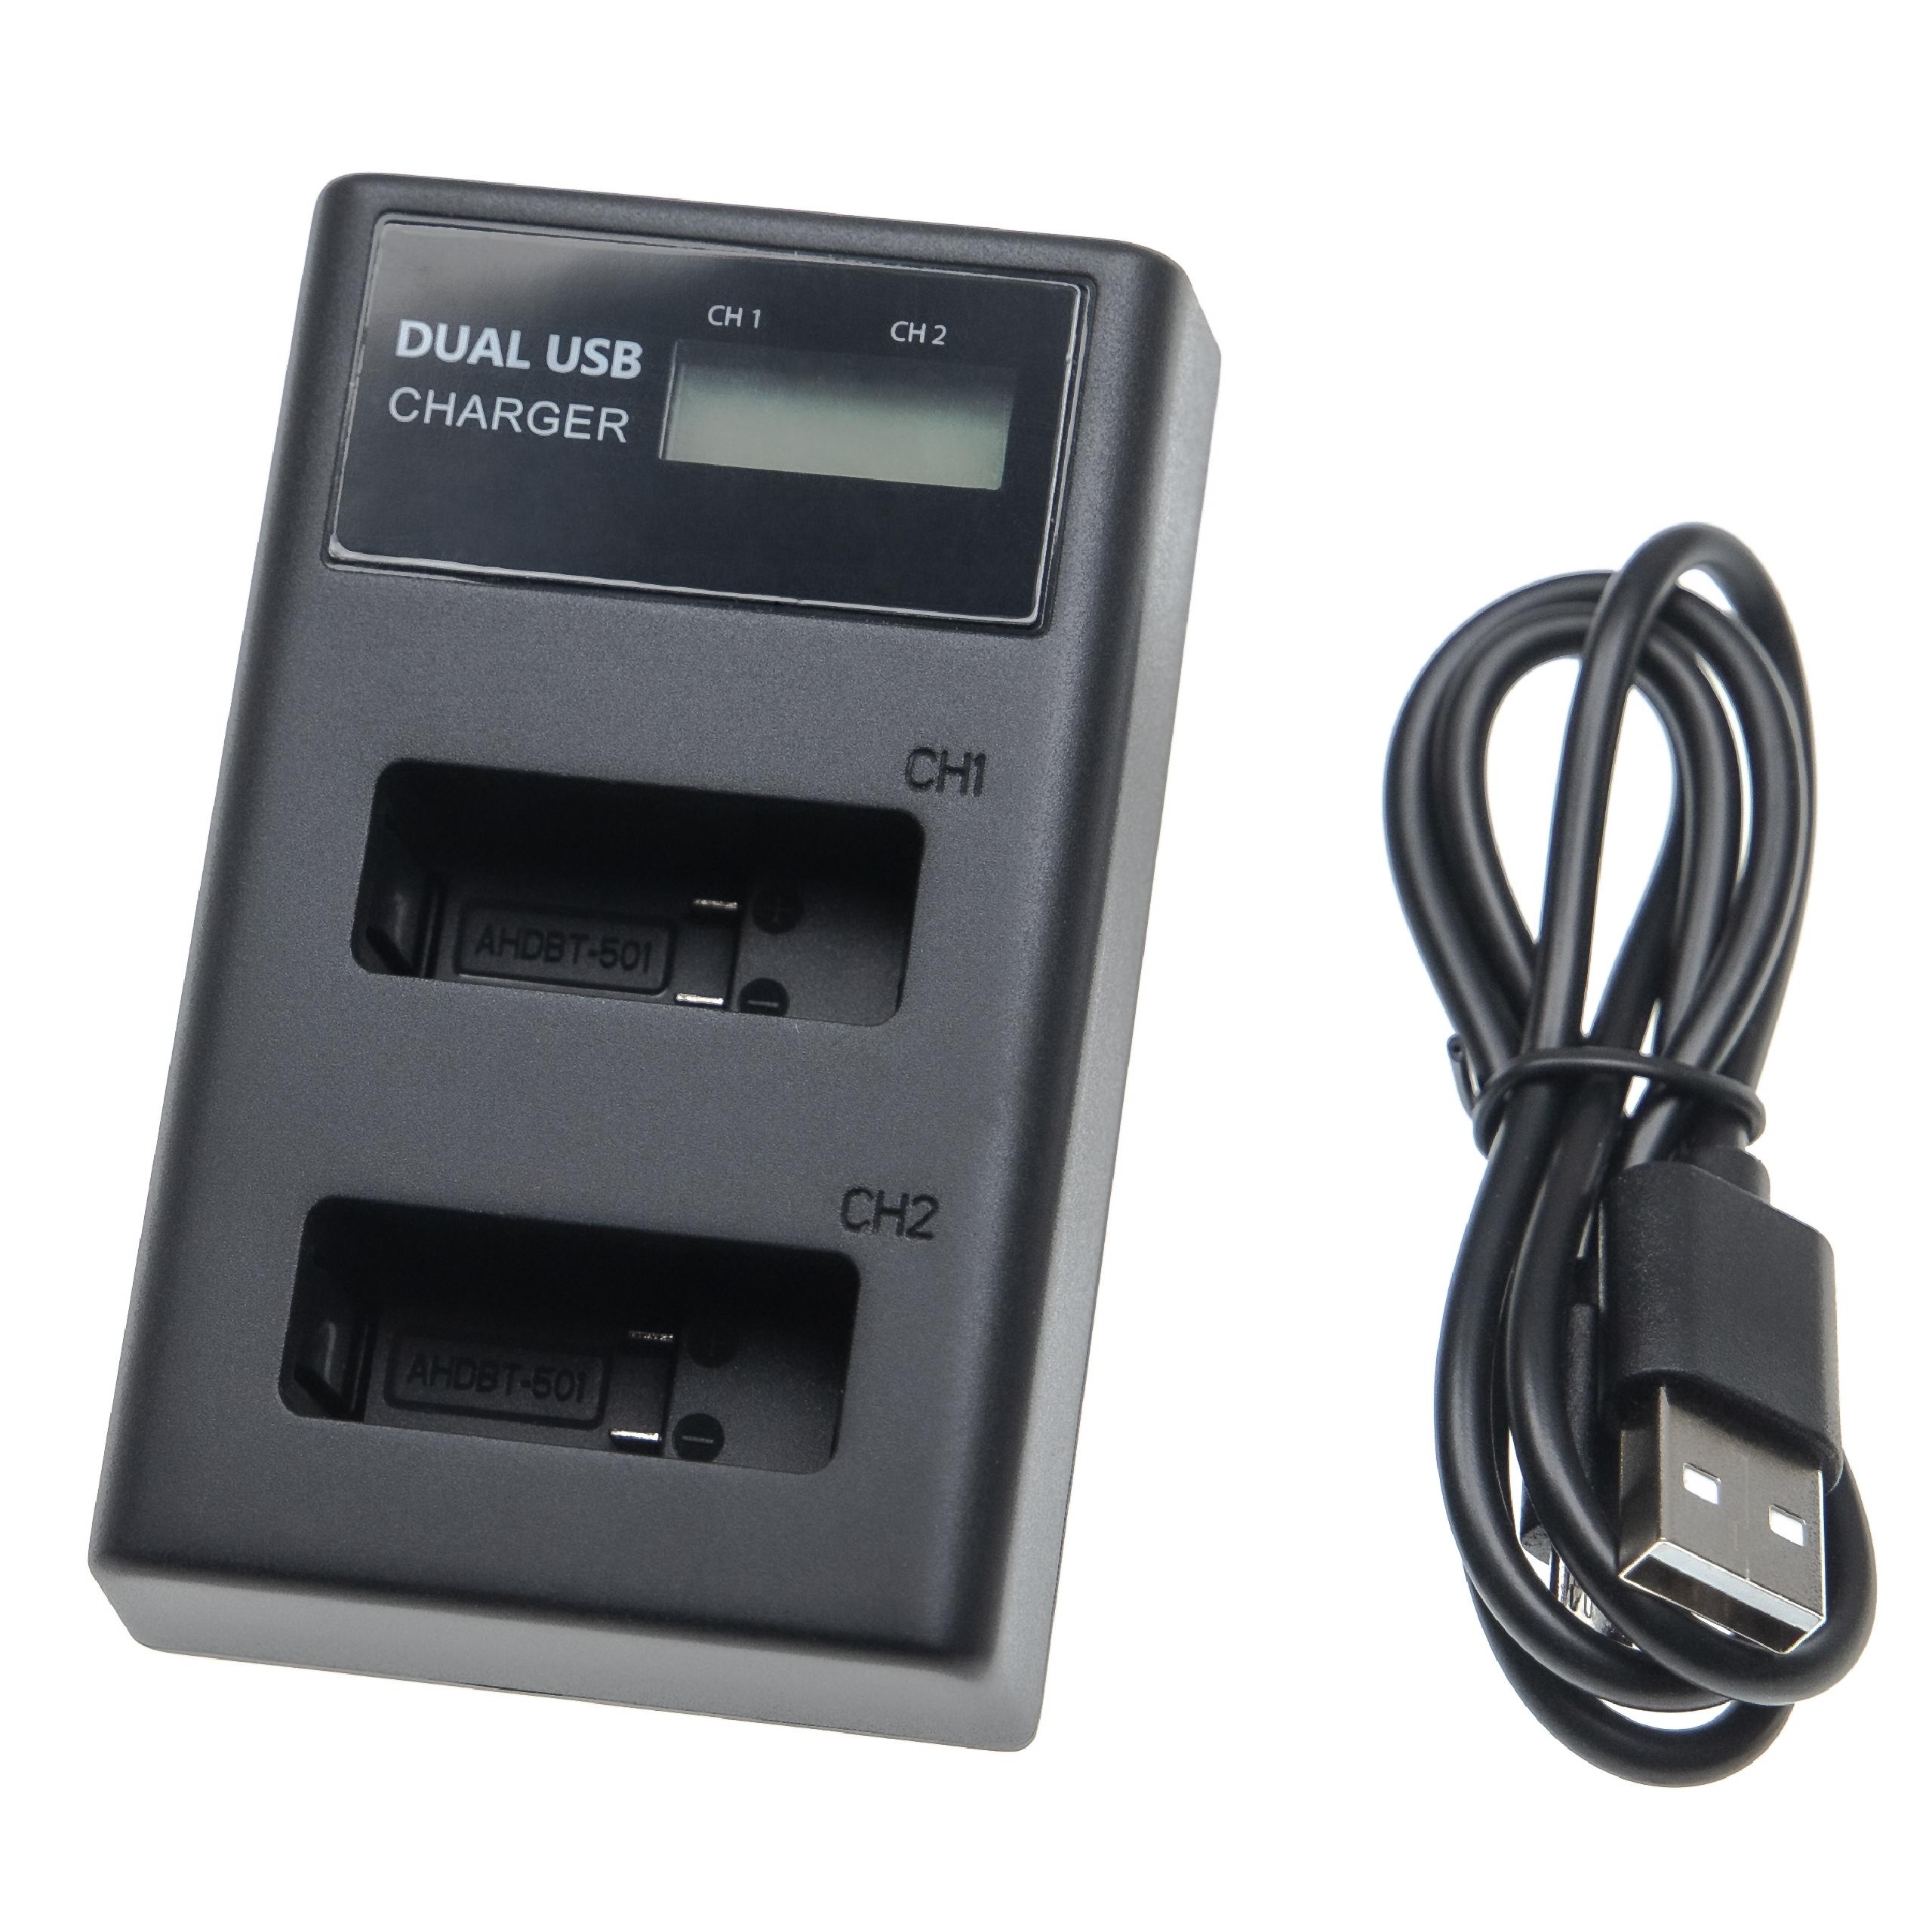 Battery Charger suitable for Hero 5 Black Camera etc. - 0,7 / 0,5 A, 4.2 V